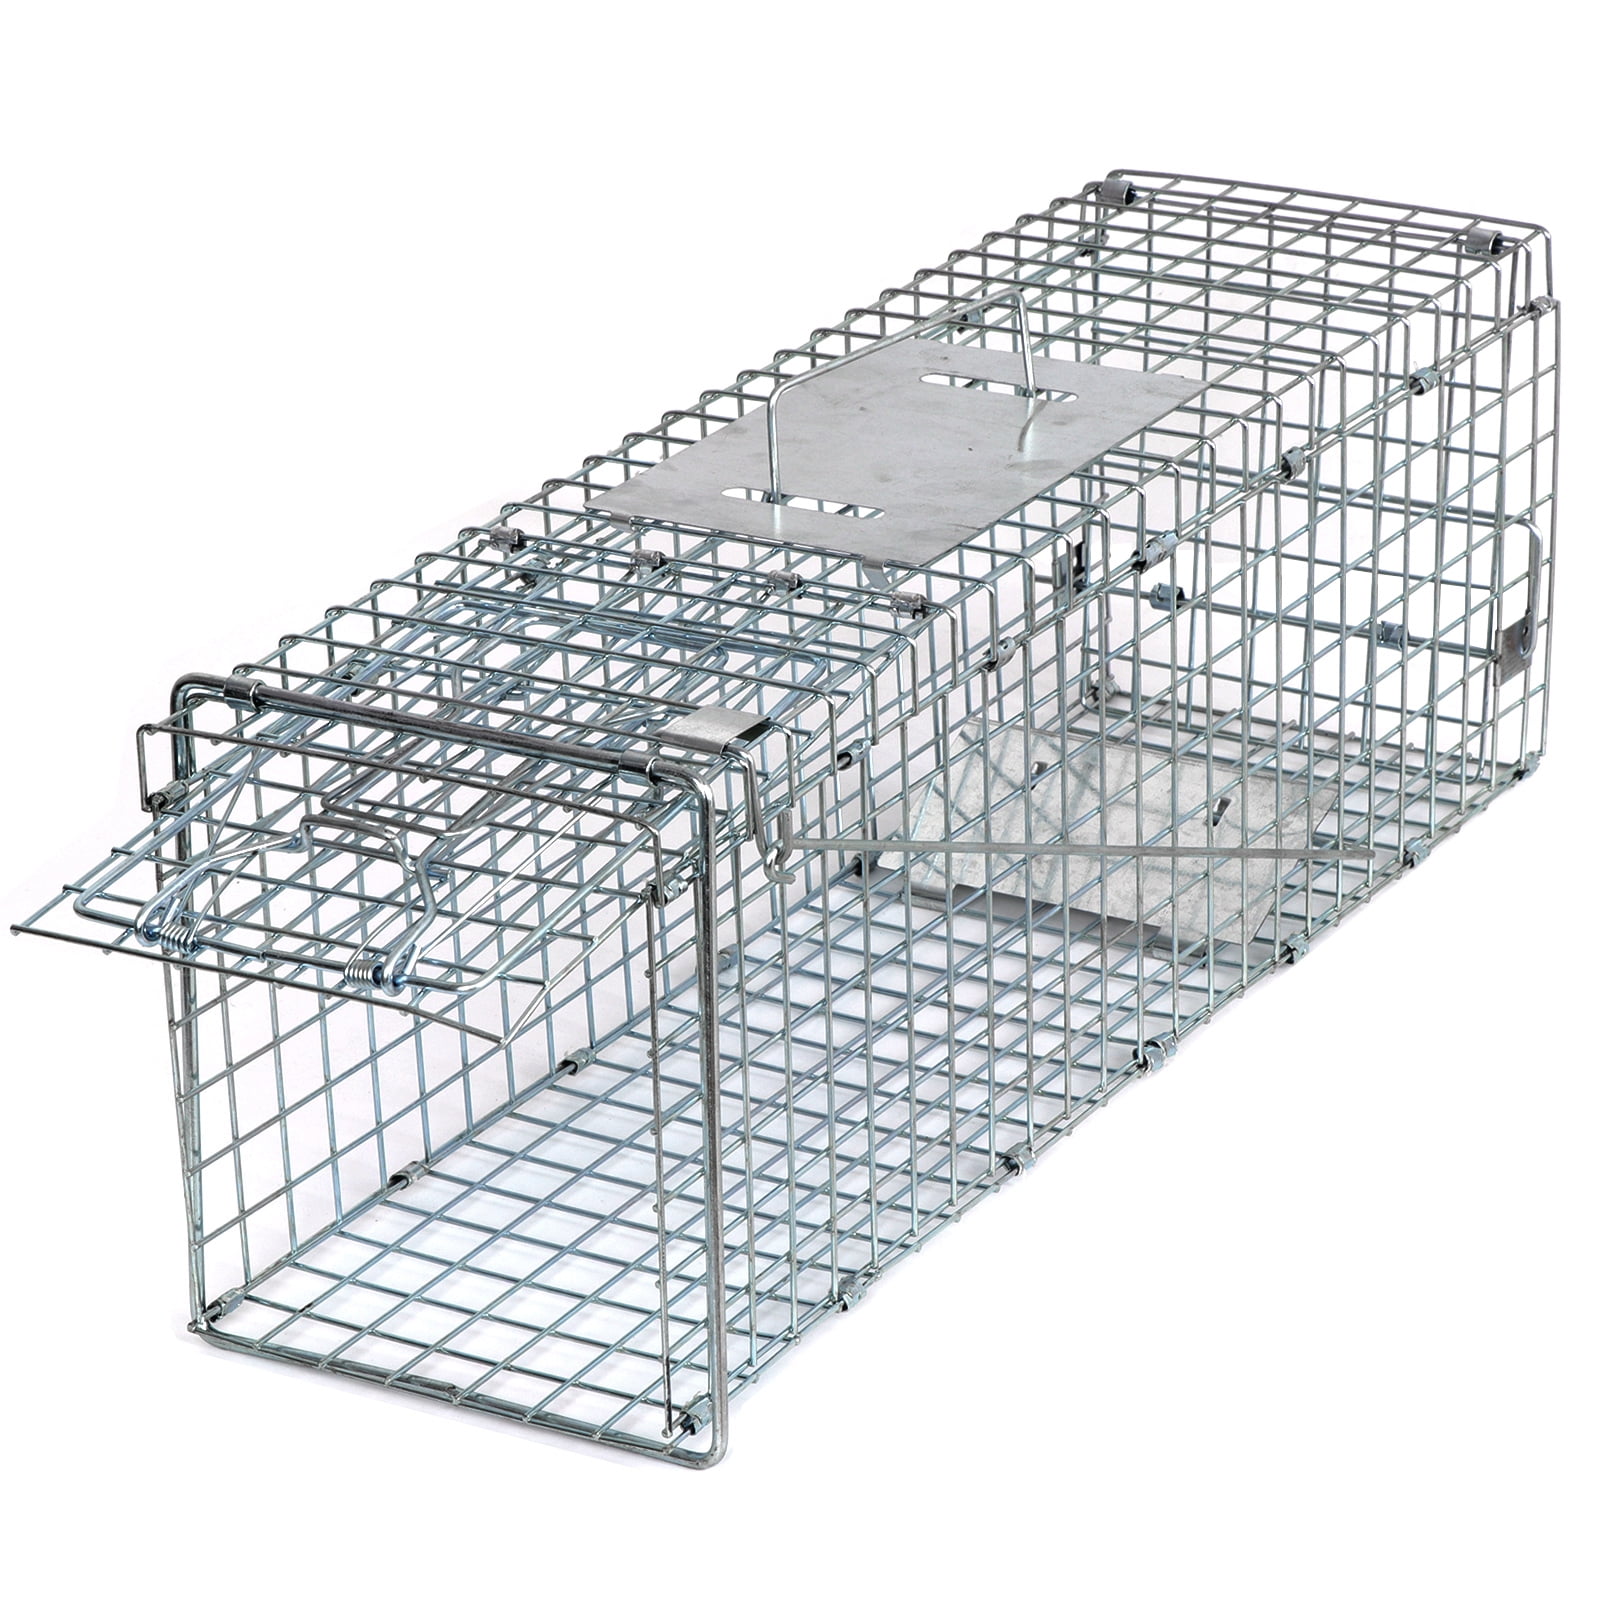 Details about   Humane Small Live Animal Control Steel Trap Cage Raccoon Skunk Cat 32"x12.5"x12" 